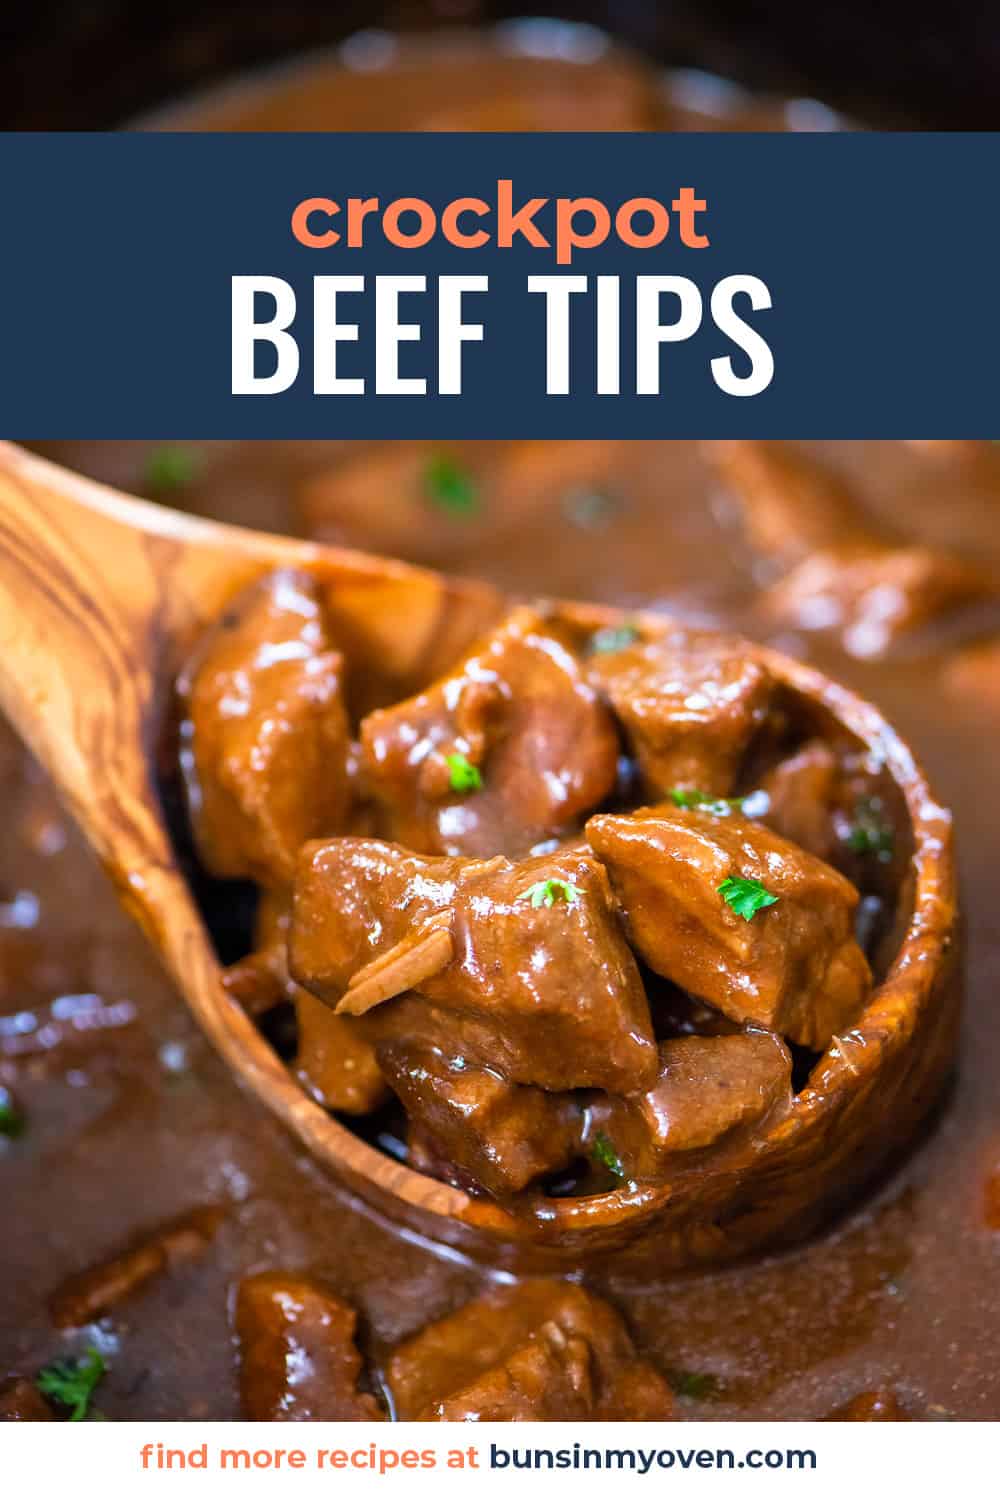 Crockpot beef tips and gravy in wooden ladle.